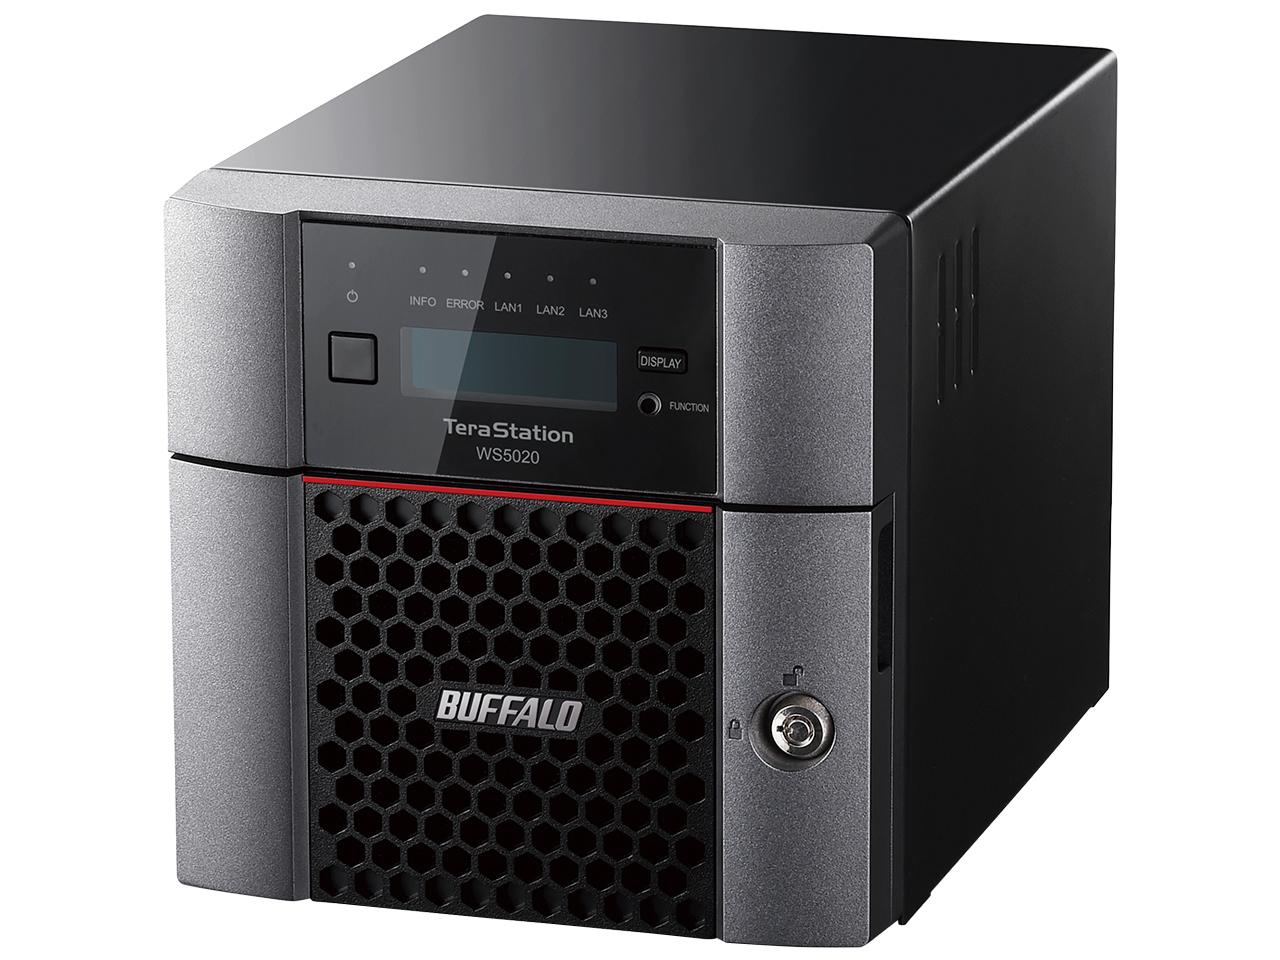 Windows@Server@IoT@2019@for@Storage@Workgroup@Editionځ@2xCfXNgbvNAS@2TB  WS5220DN02W9 1 BUFFALO obt@[